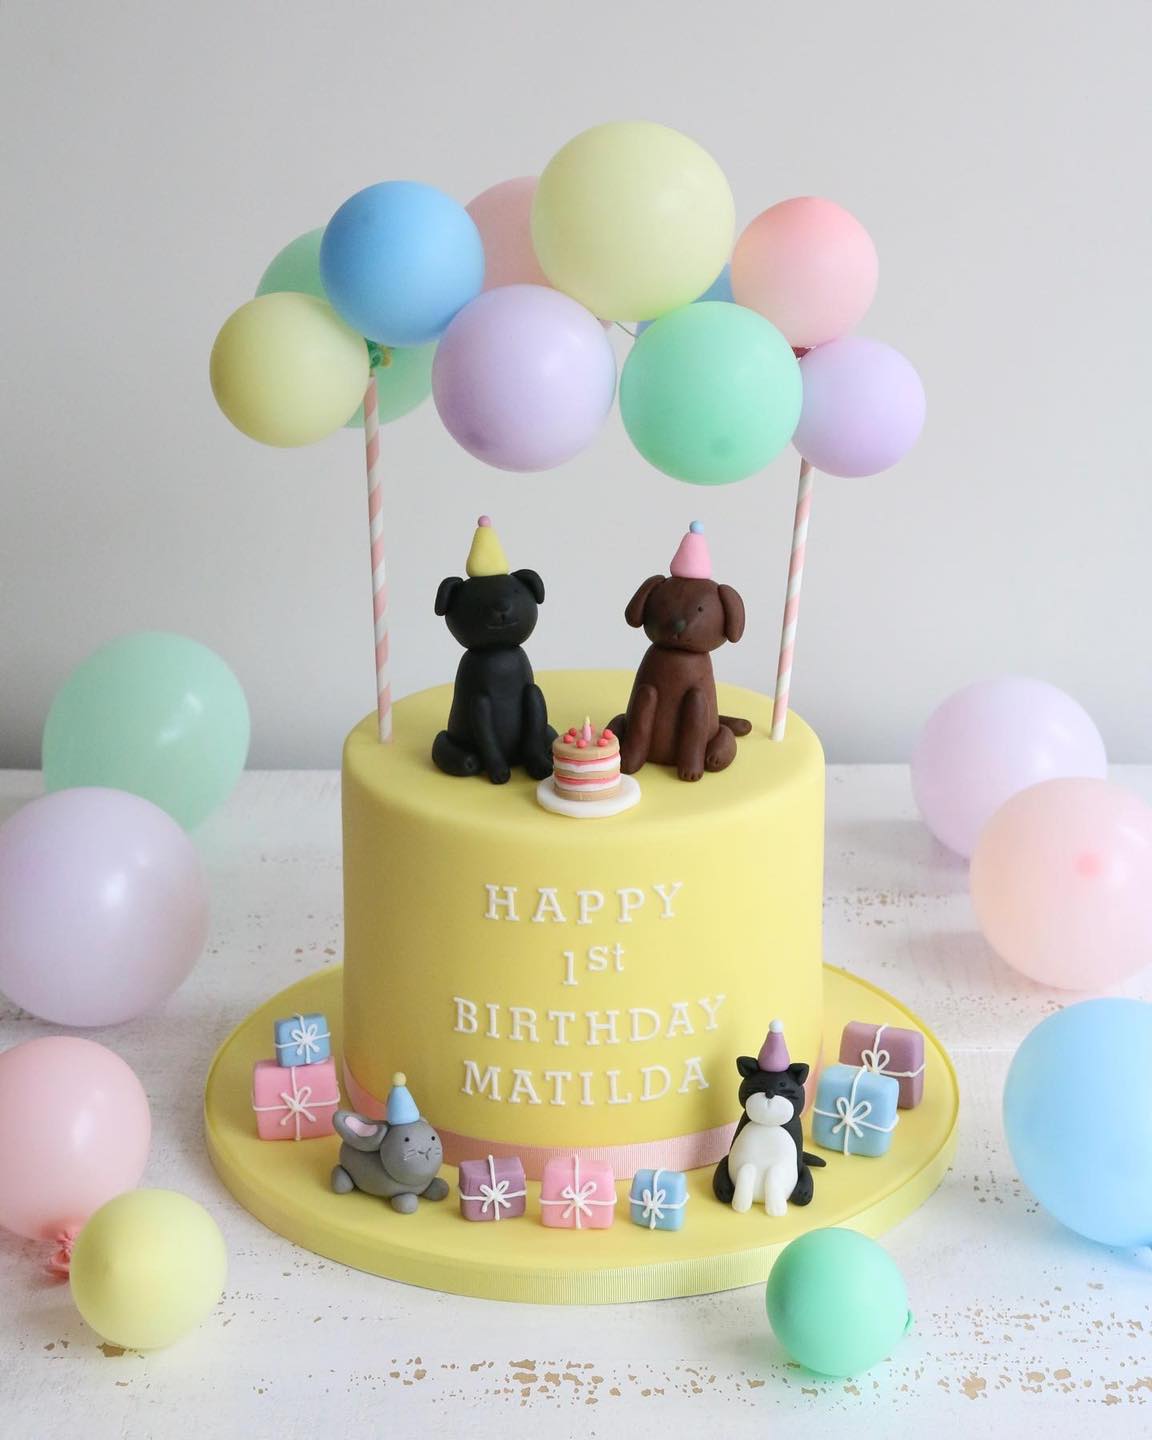 1st Birthday Cakes | Claygate, Surrey | Afternoon Crumbs